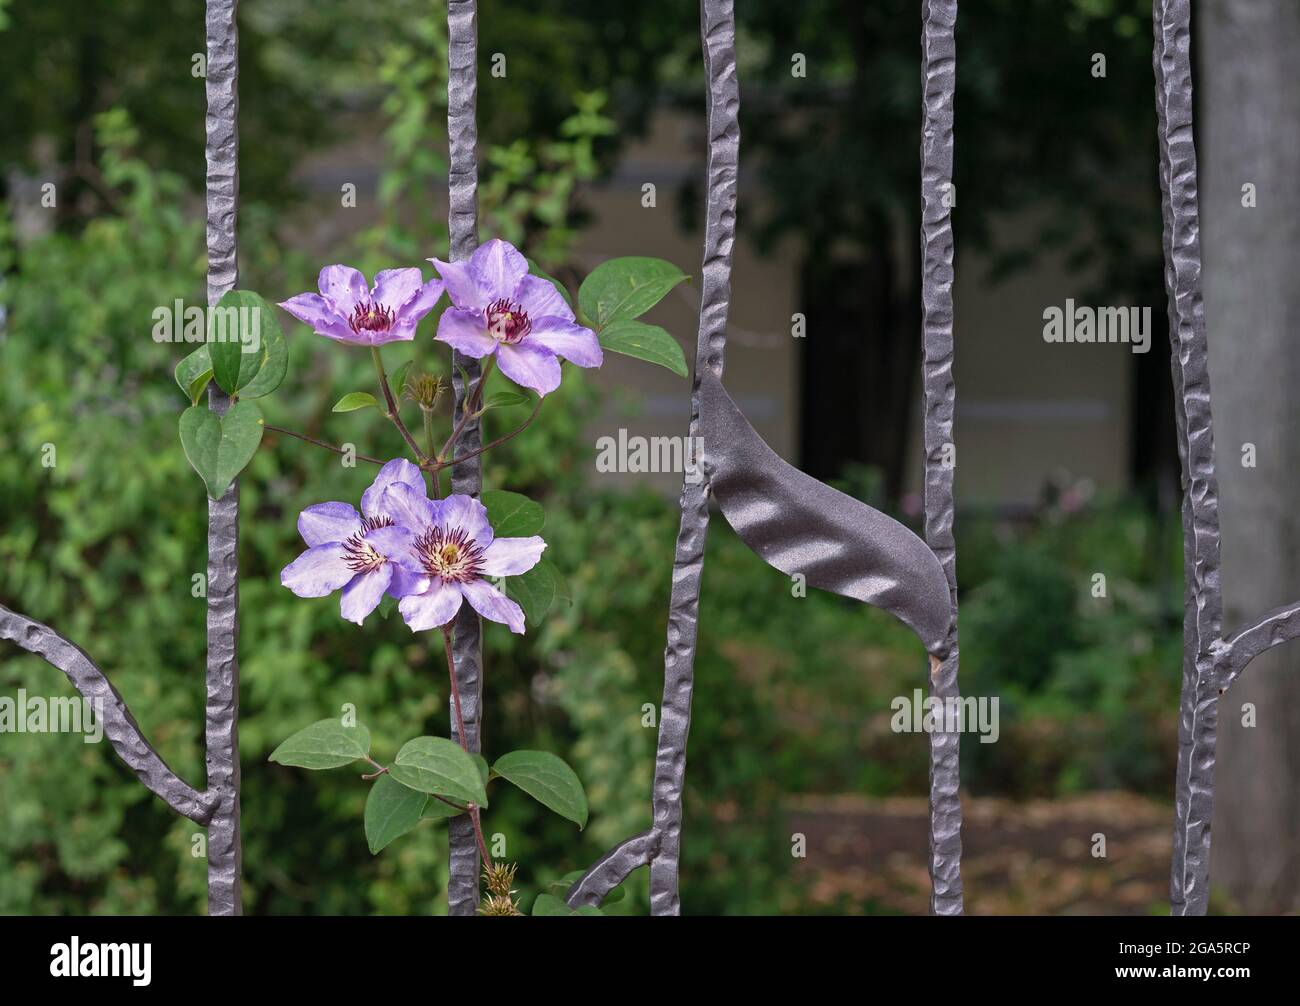 Clambering plant violet clematis on a wrought-iron fence in the garden. Stock Photo